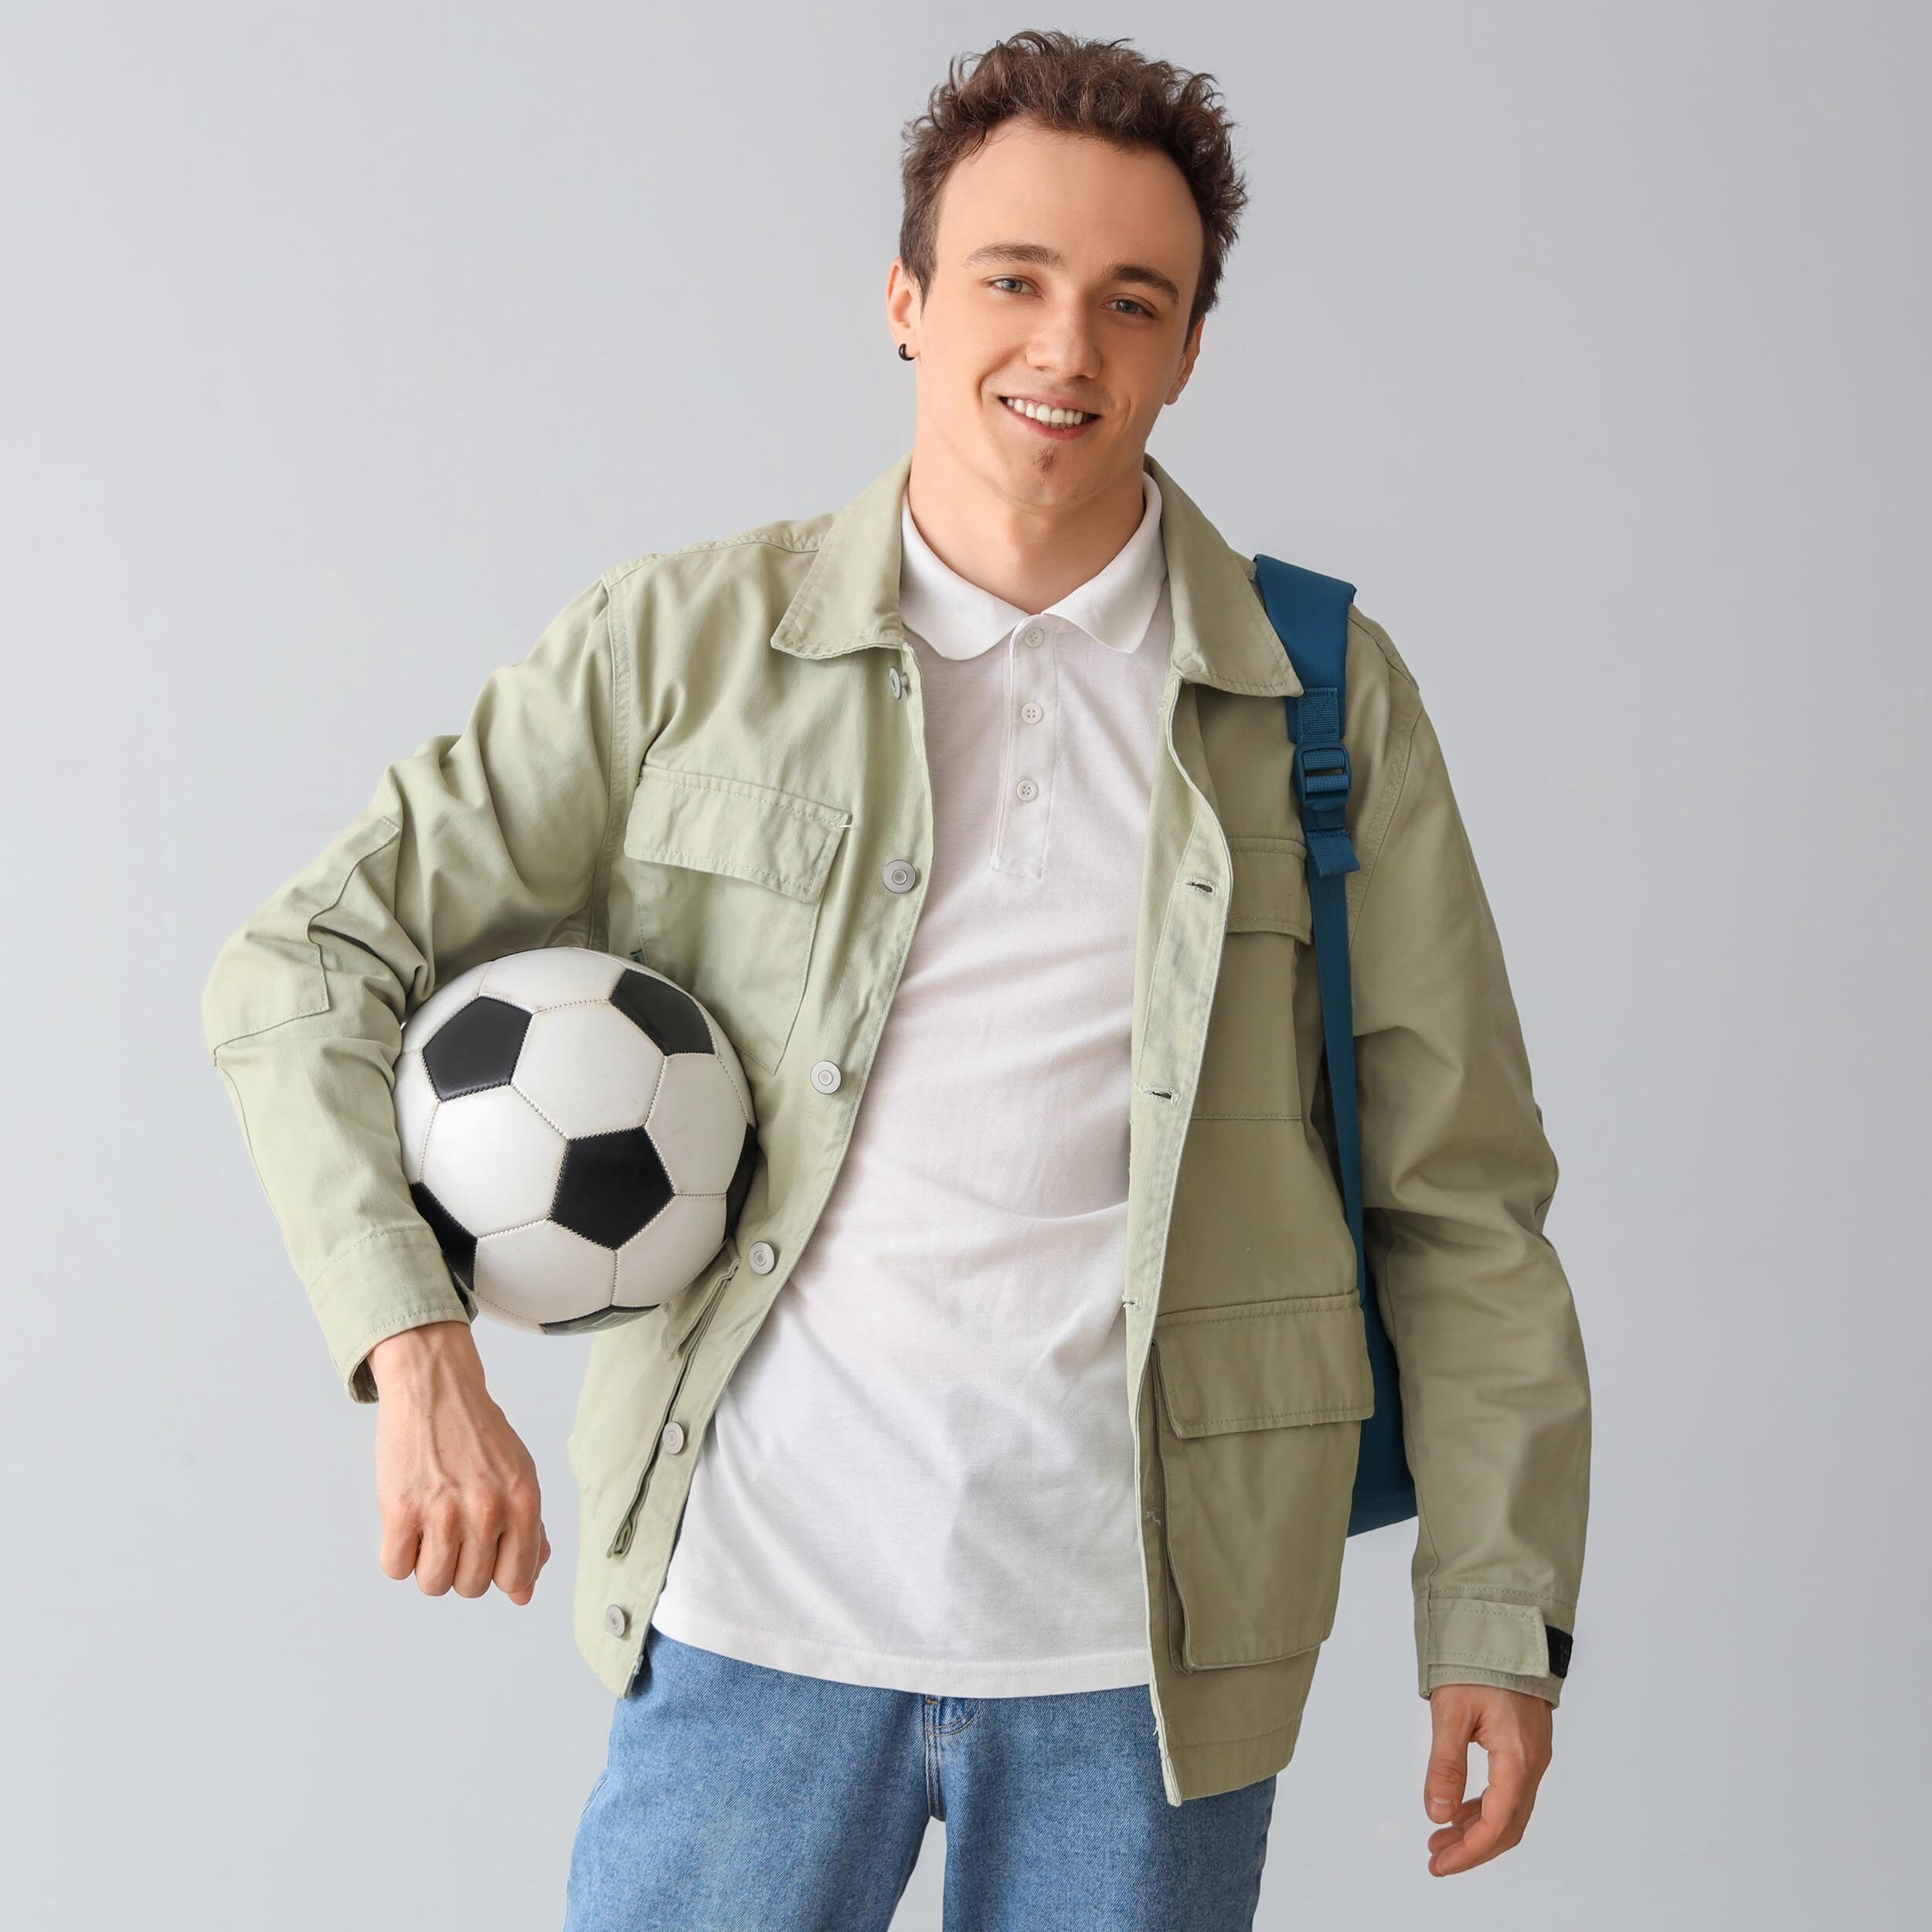 Male student with backpack and soccer ball on grey background.